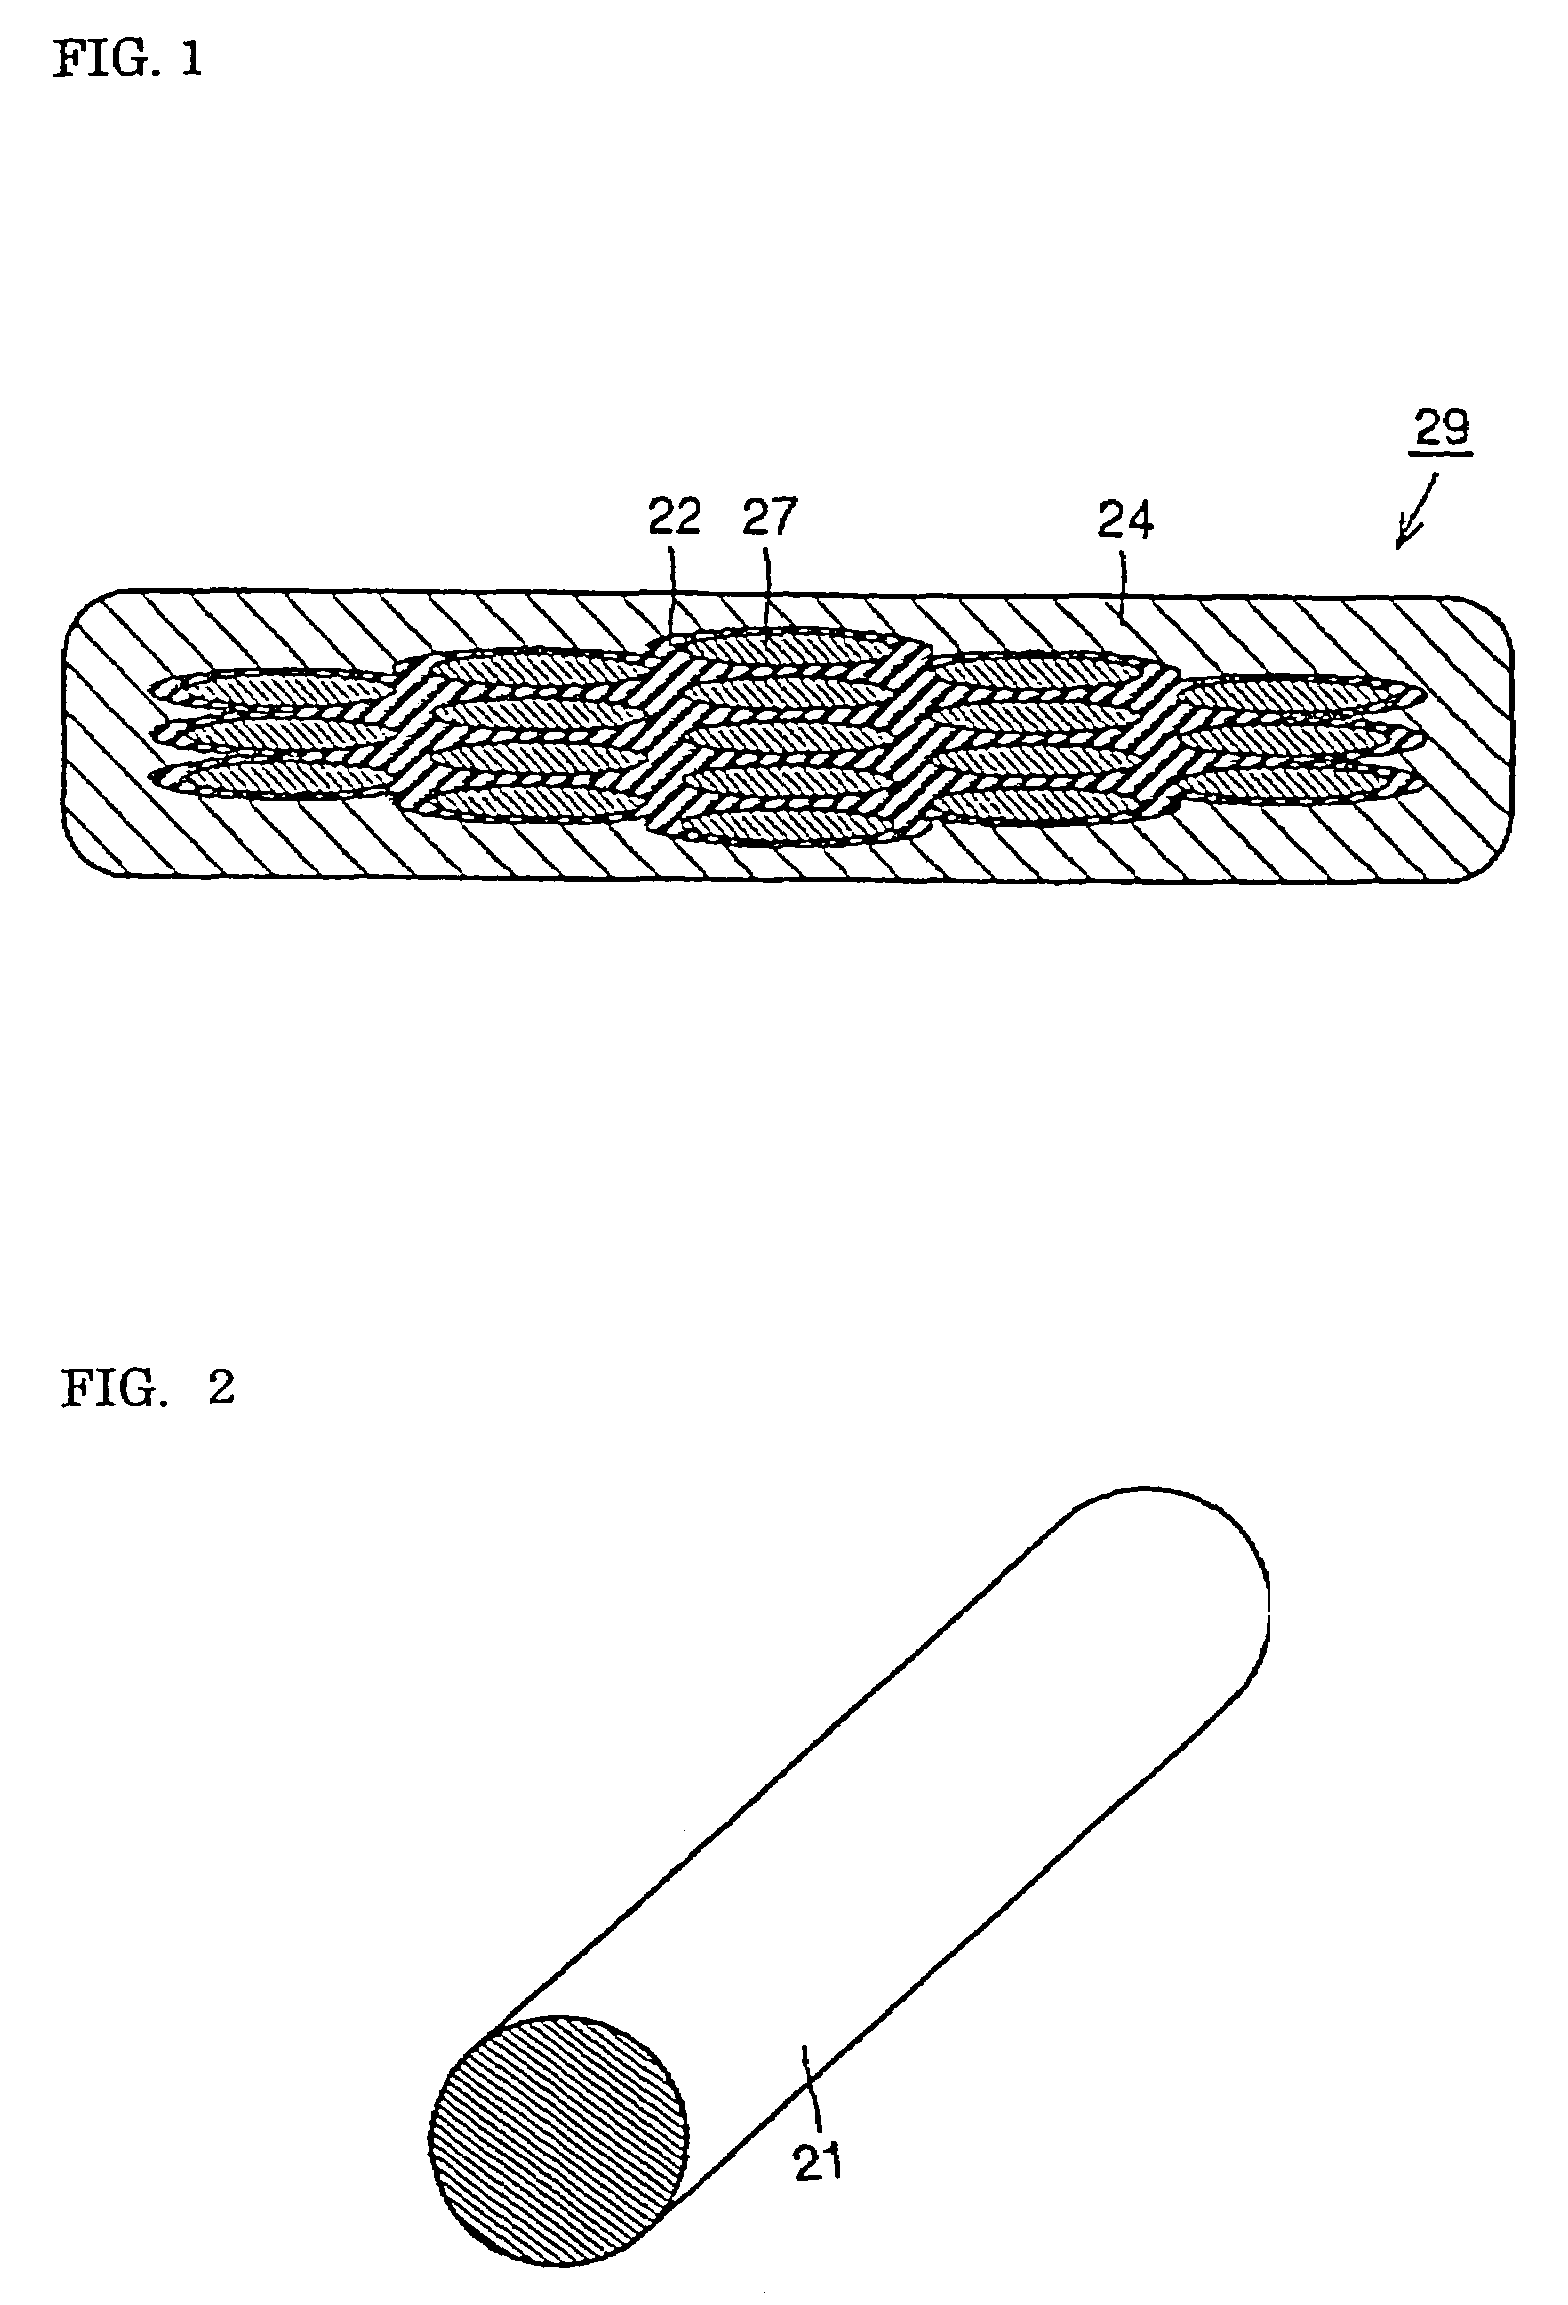 Oxide high-temperature superconducting wire and method of producing the same